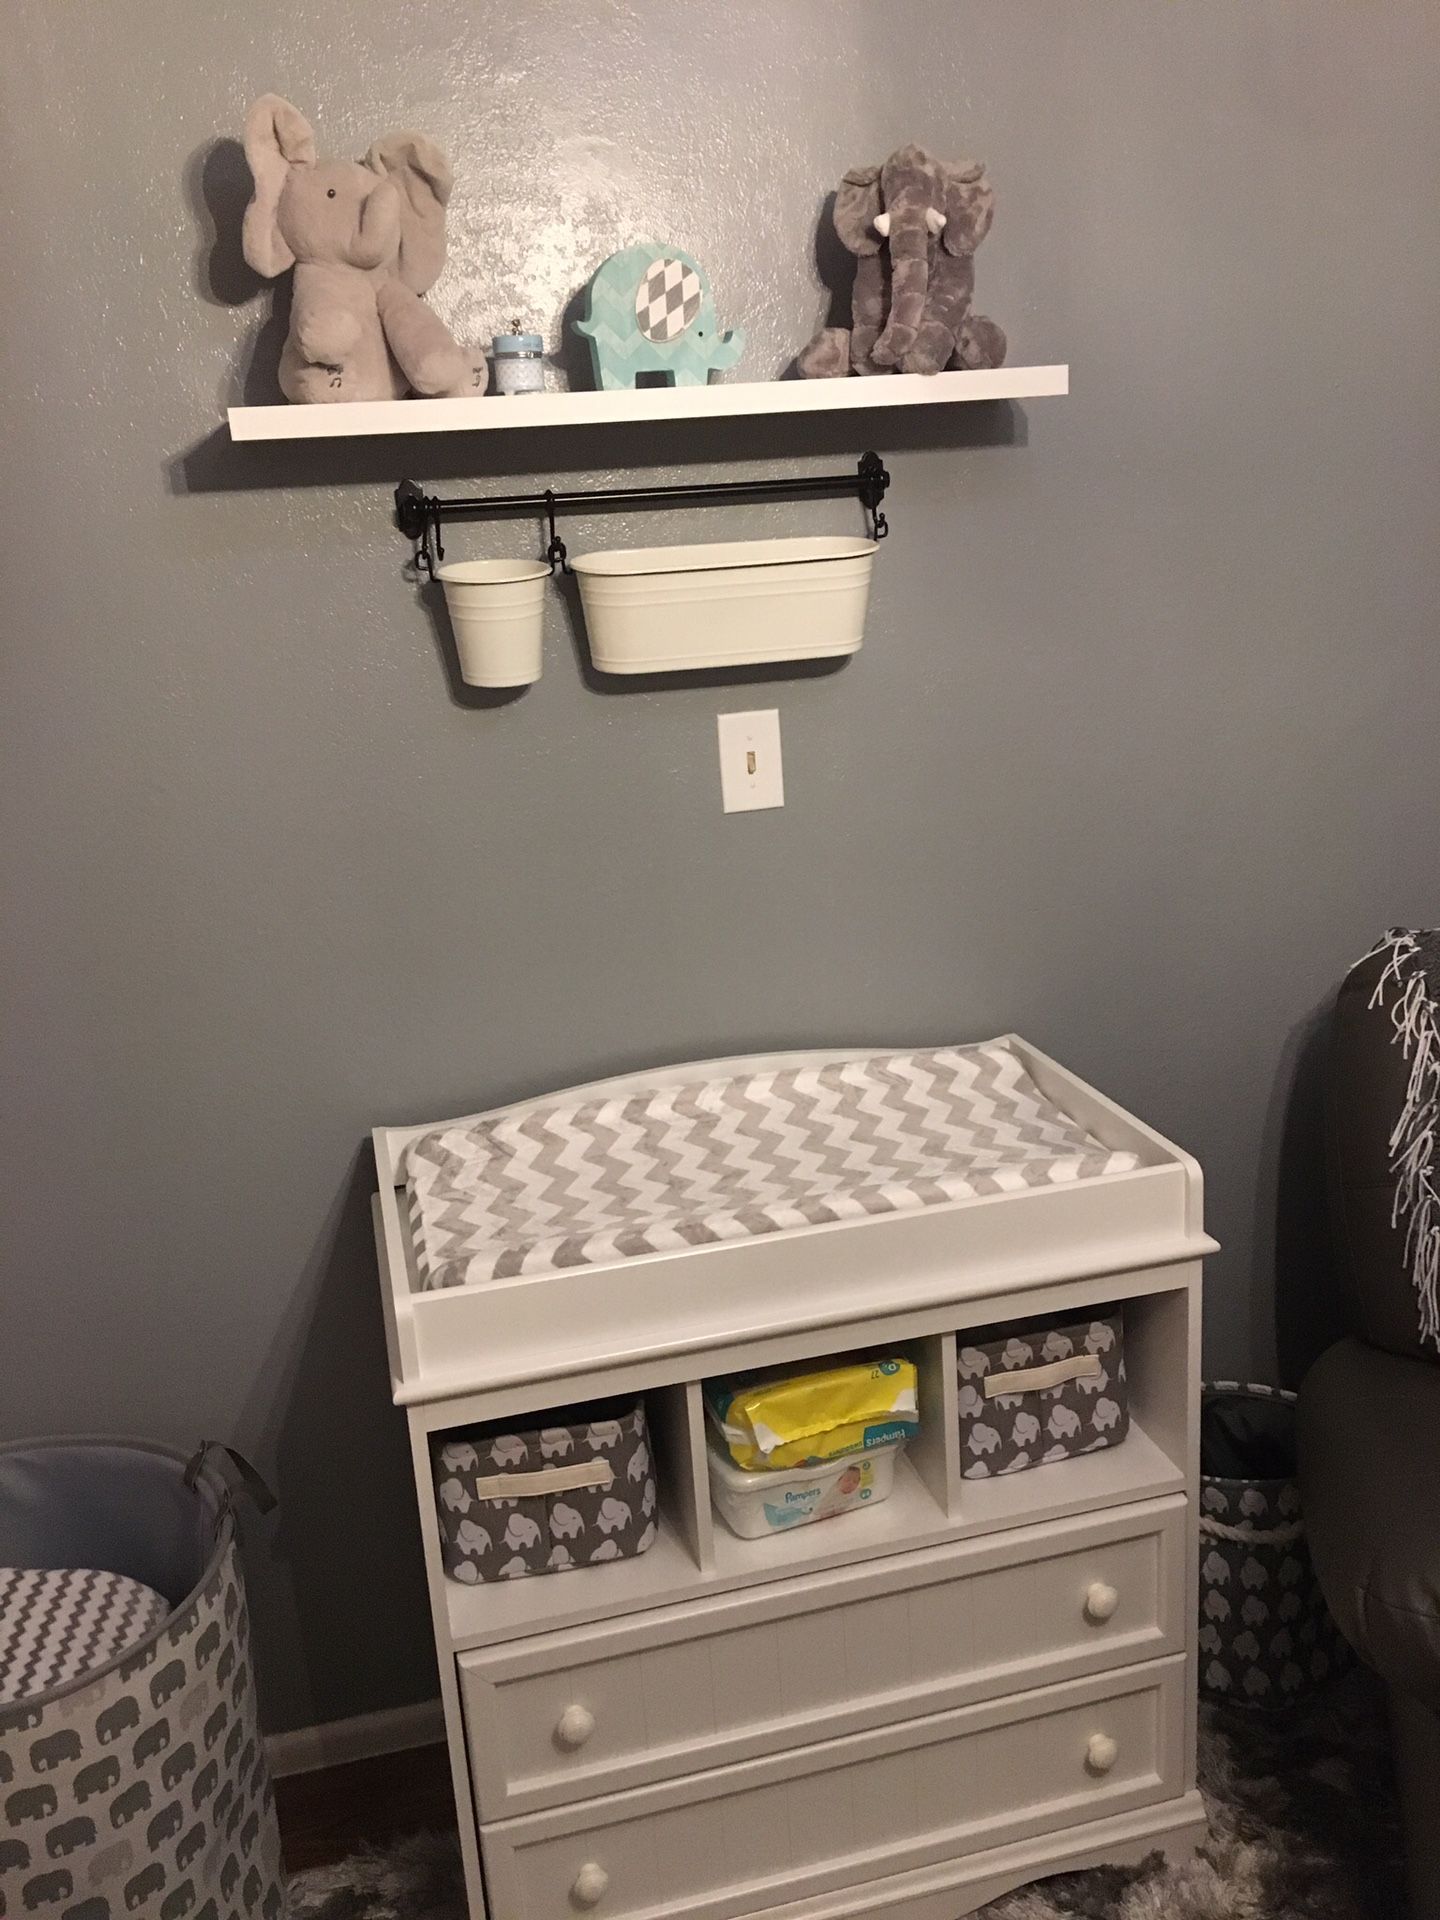 Crib and Changing table